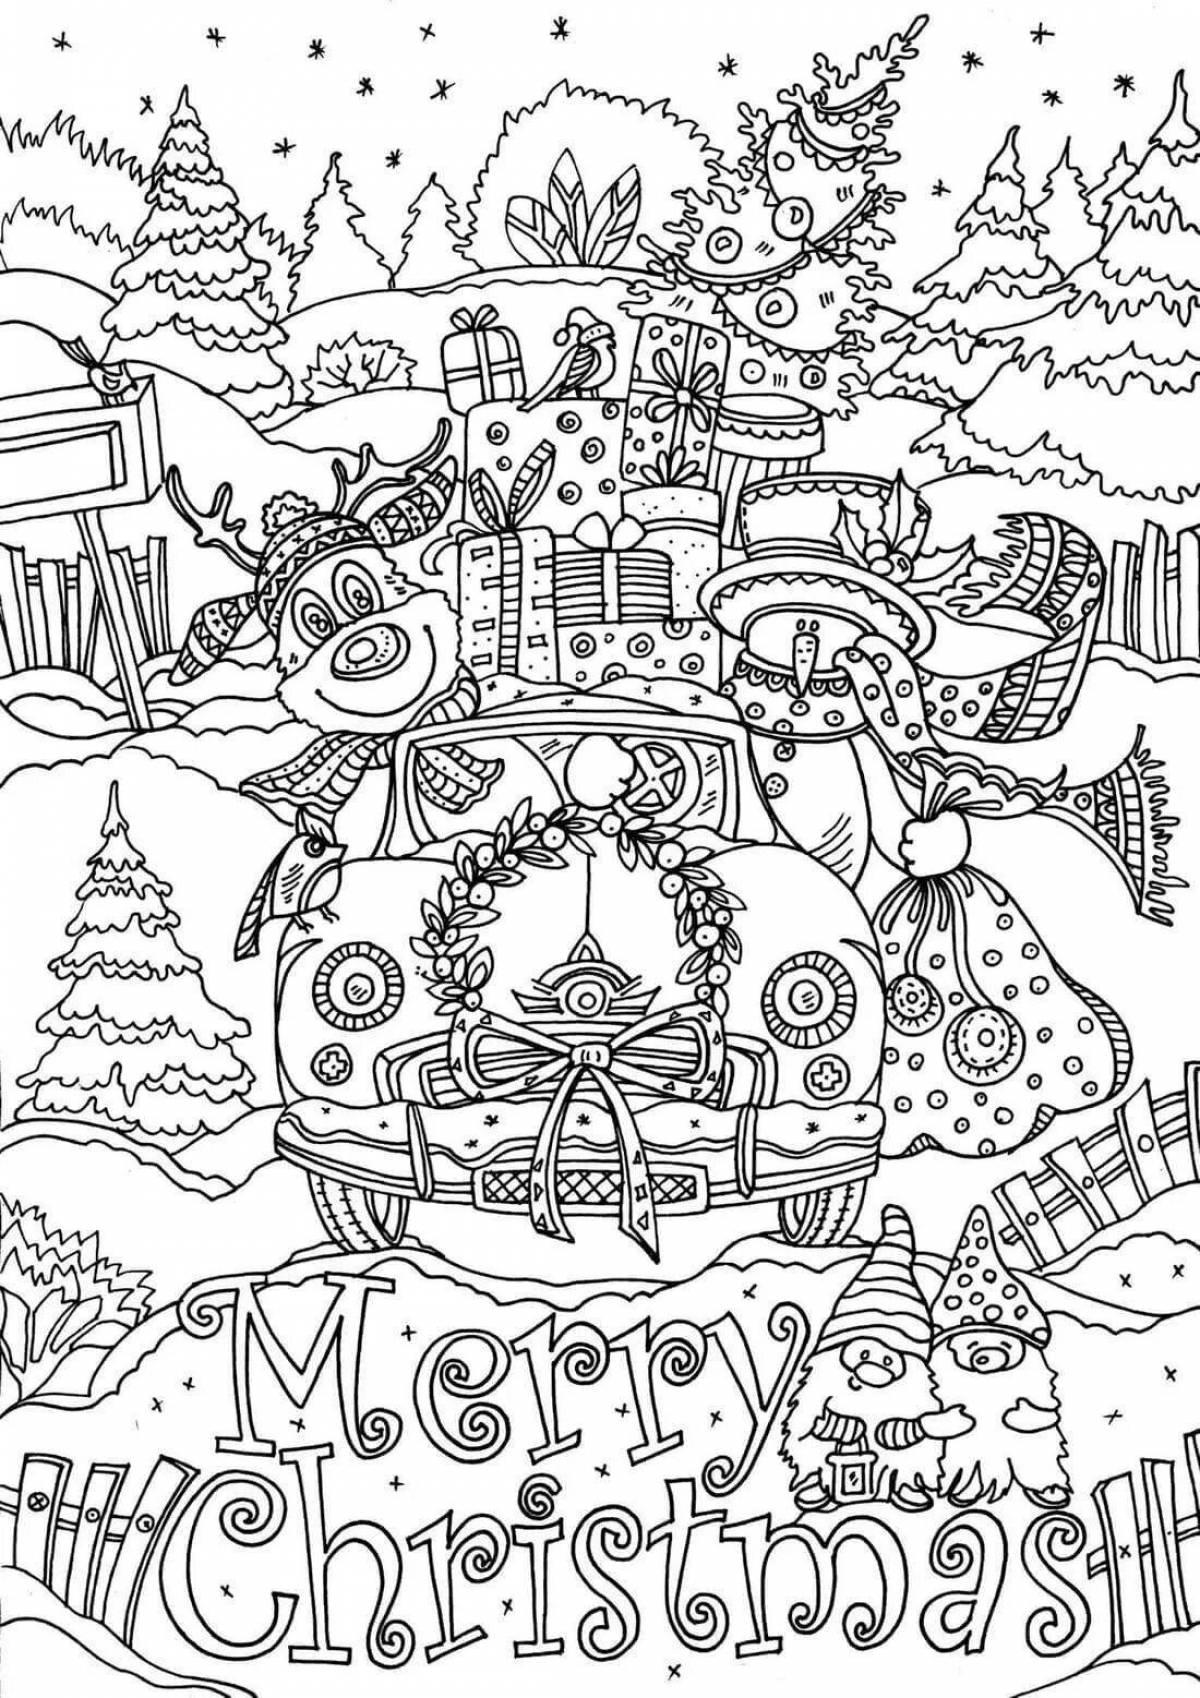 Major winter coloring book for adults